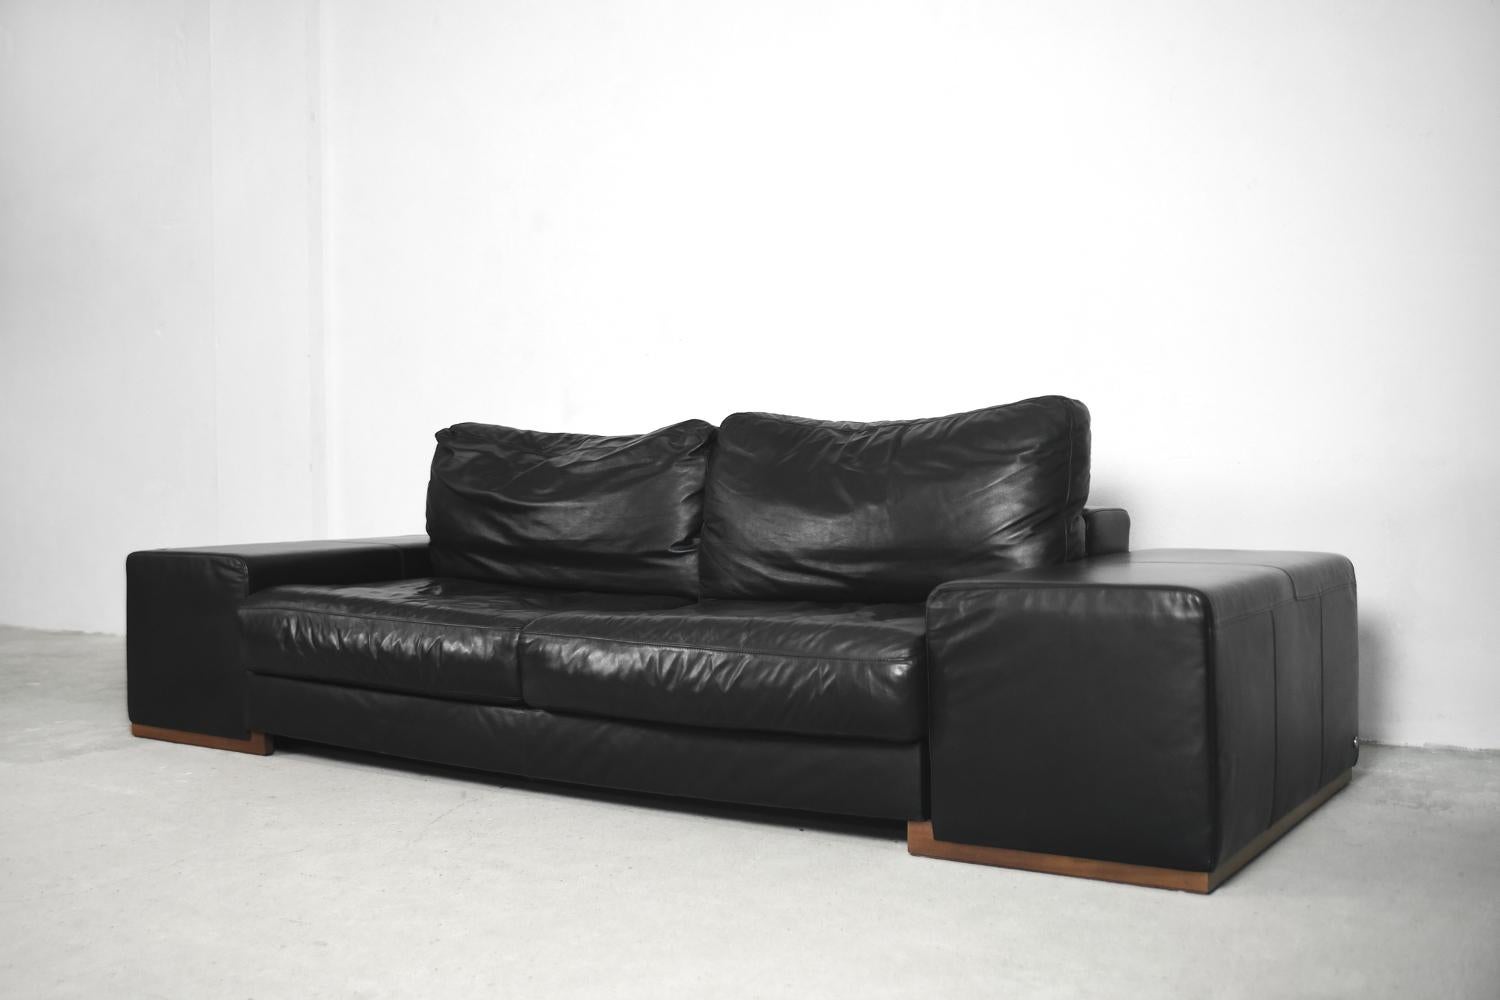 Modernist Elegant Black Leather Italian Sofa with Modules by Natuzzi For Sale 3